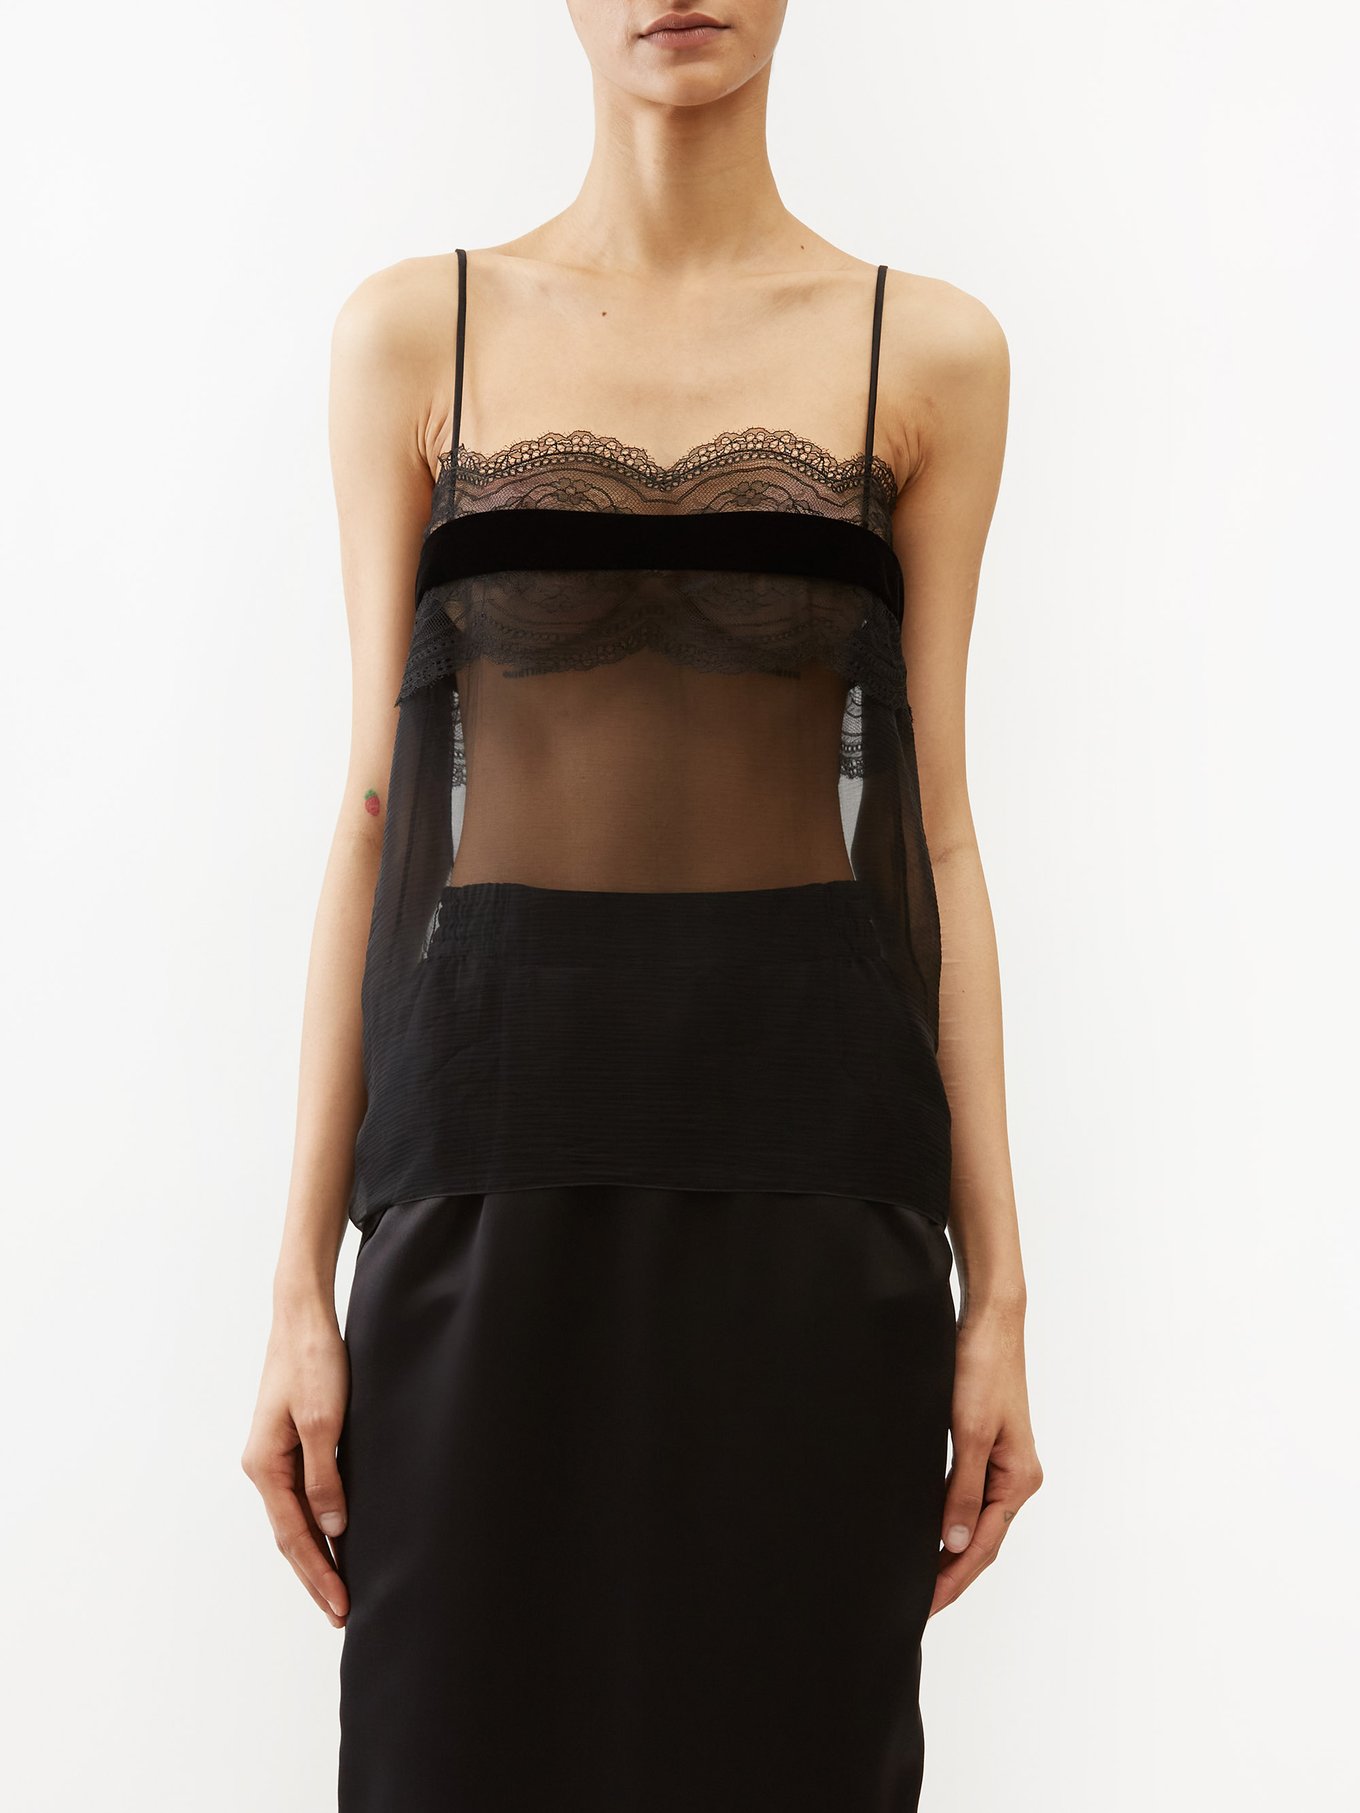 Satin Lace Trim Cami Top in Soy/black